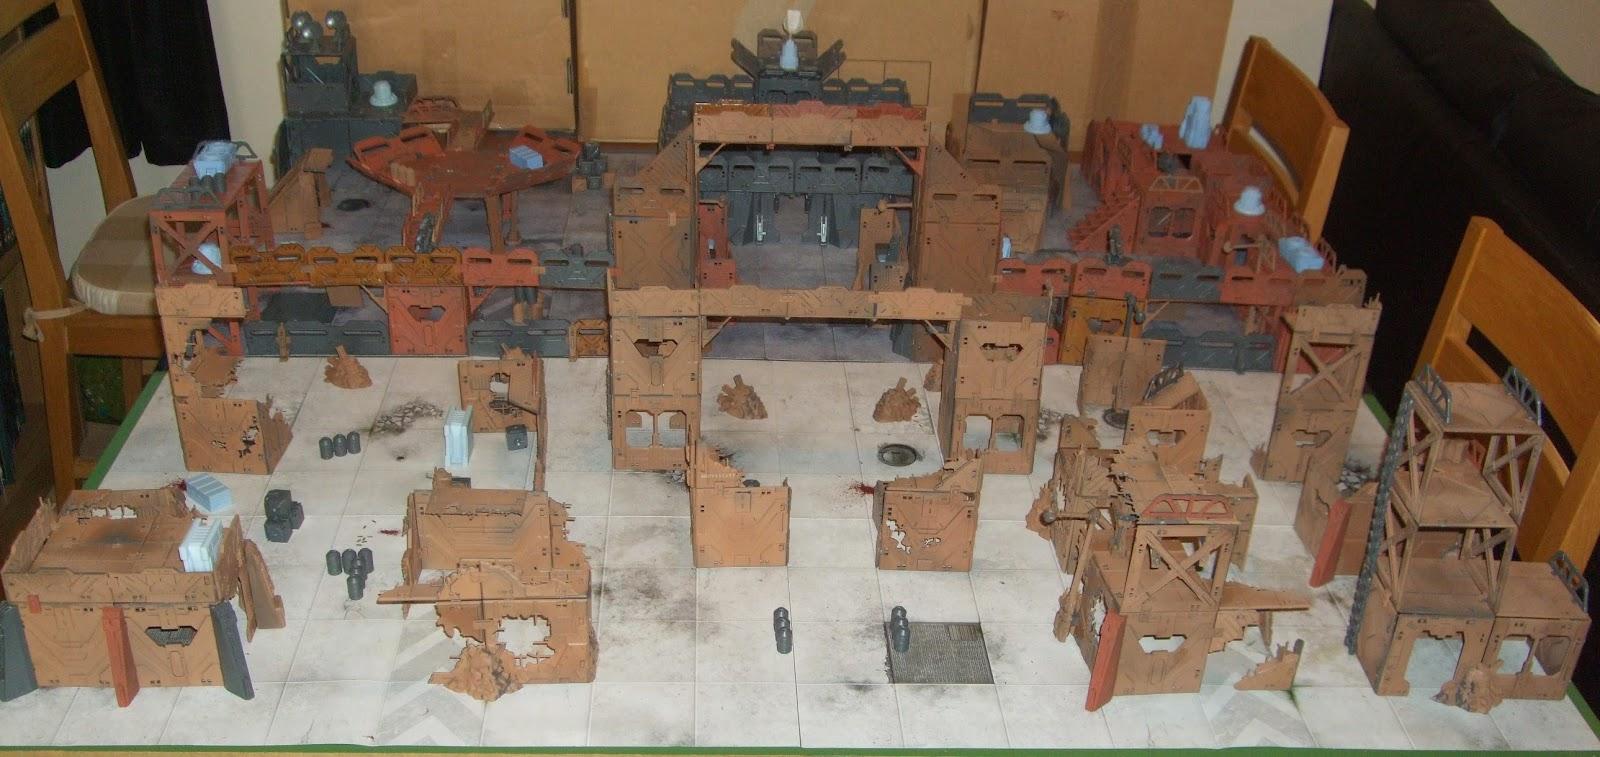 Battlezones, Deadzone, Fortress, Game Table, Mantic Checkpoint, Terrain